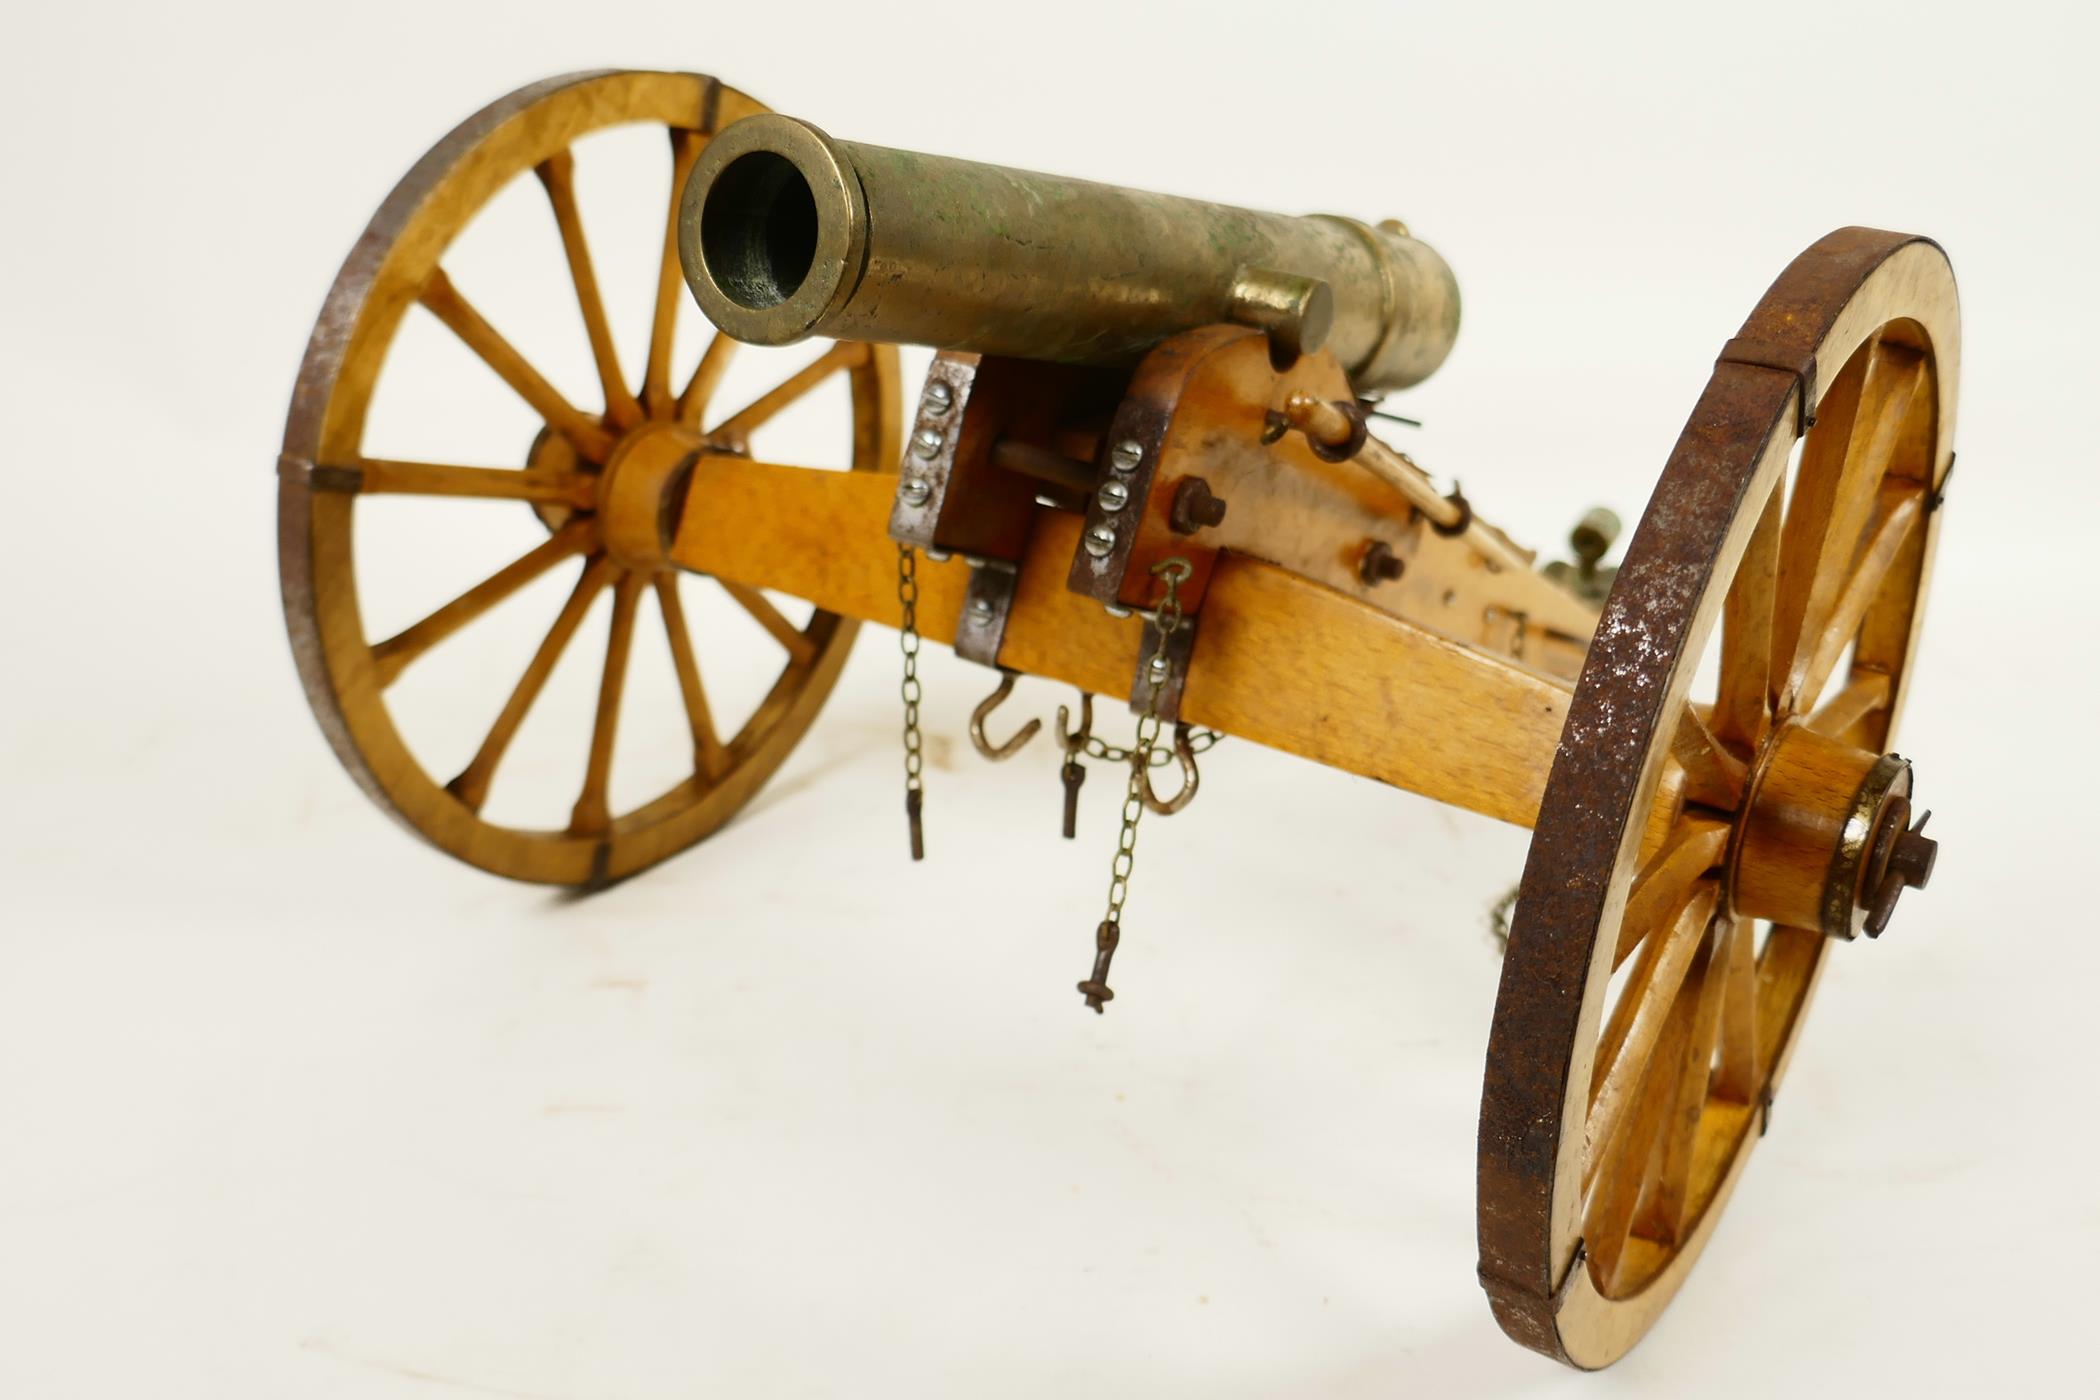 An antique ornamental table top bronze cannon, on a hand made wooden carriage with metal fittings, - Image 4 of 4